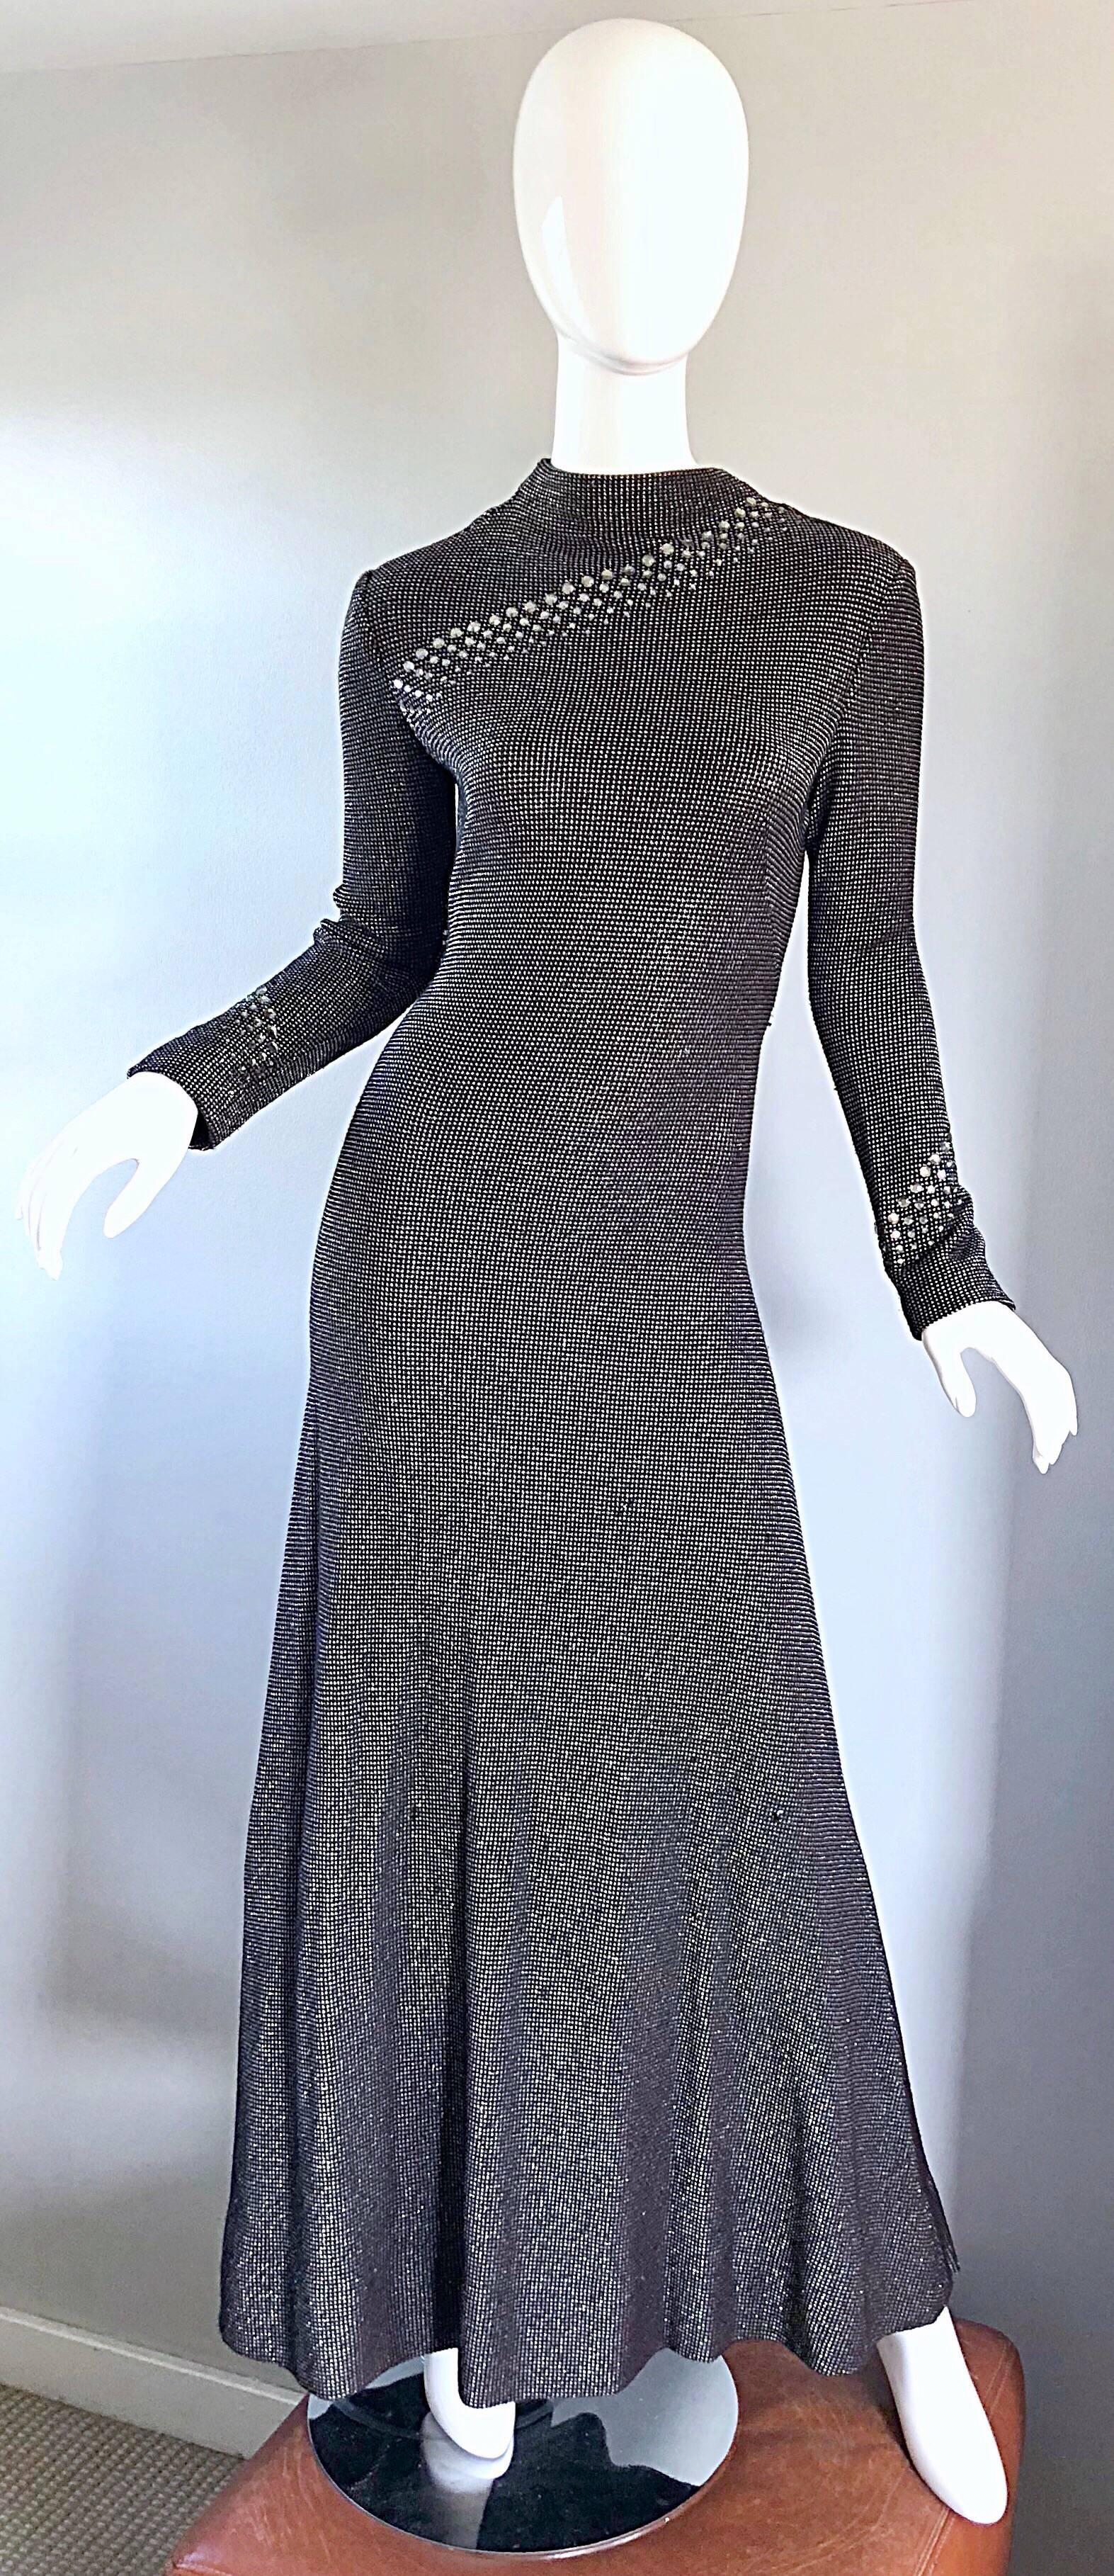 Rare early 1970s PAULINE TRIGERE for NEIMAN MARCUS evening knit maxi dress! Encrusted with hand-sewn rhinestones above the bust, and on each sleeve. Black, white and brown mini print, with just the right amount of metallic sheen. Smart tailored